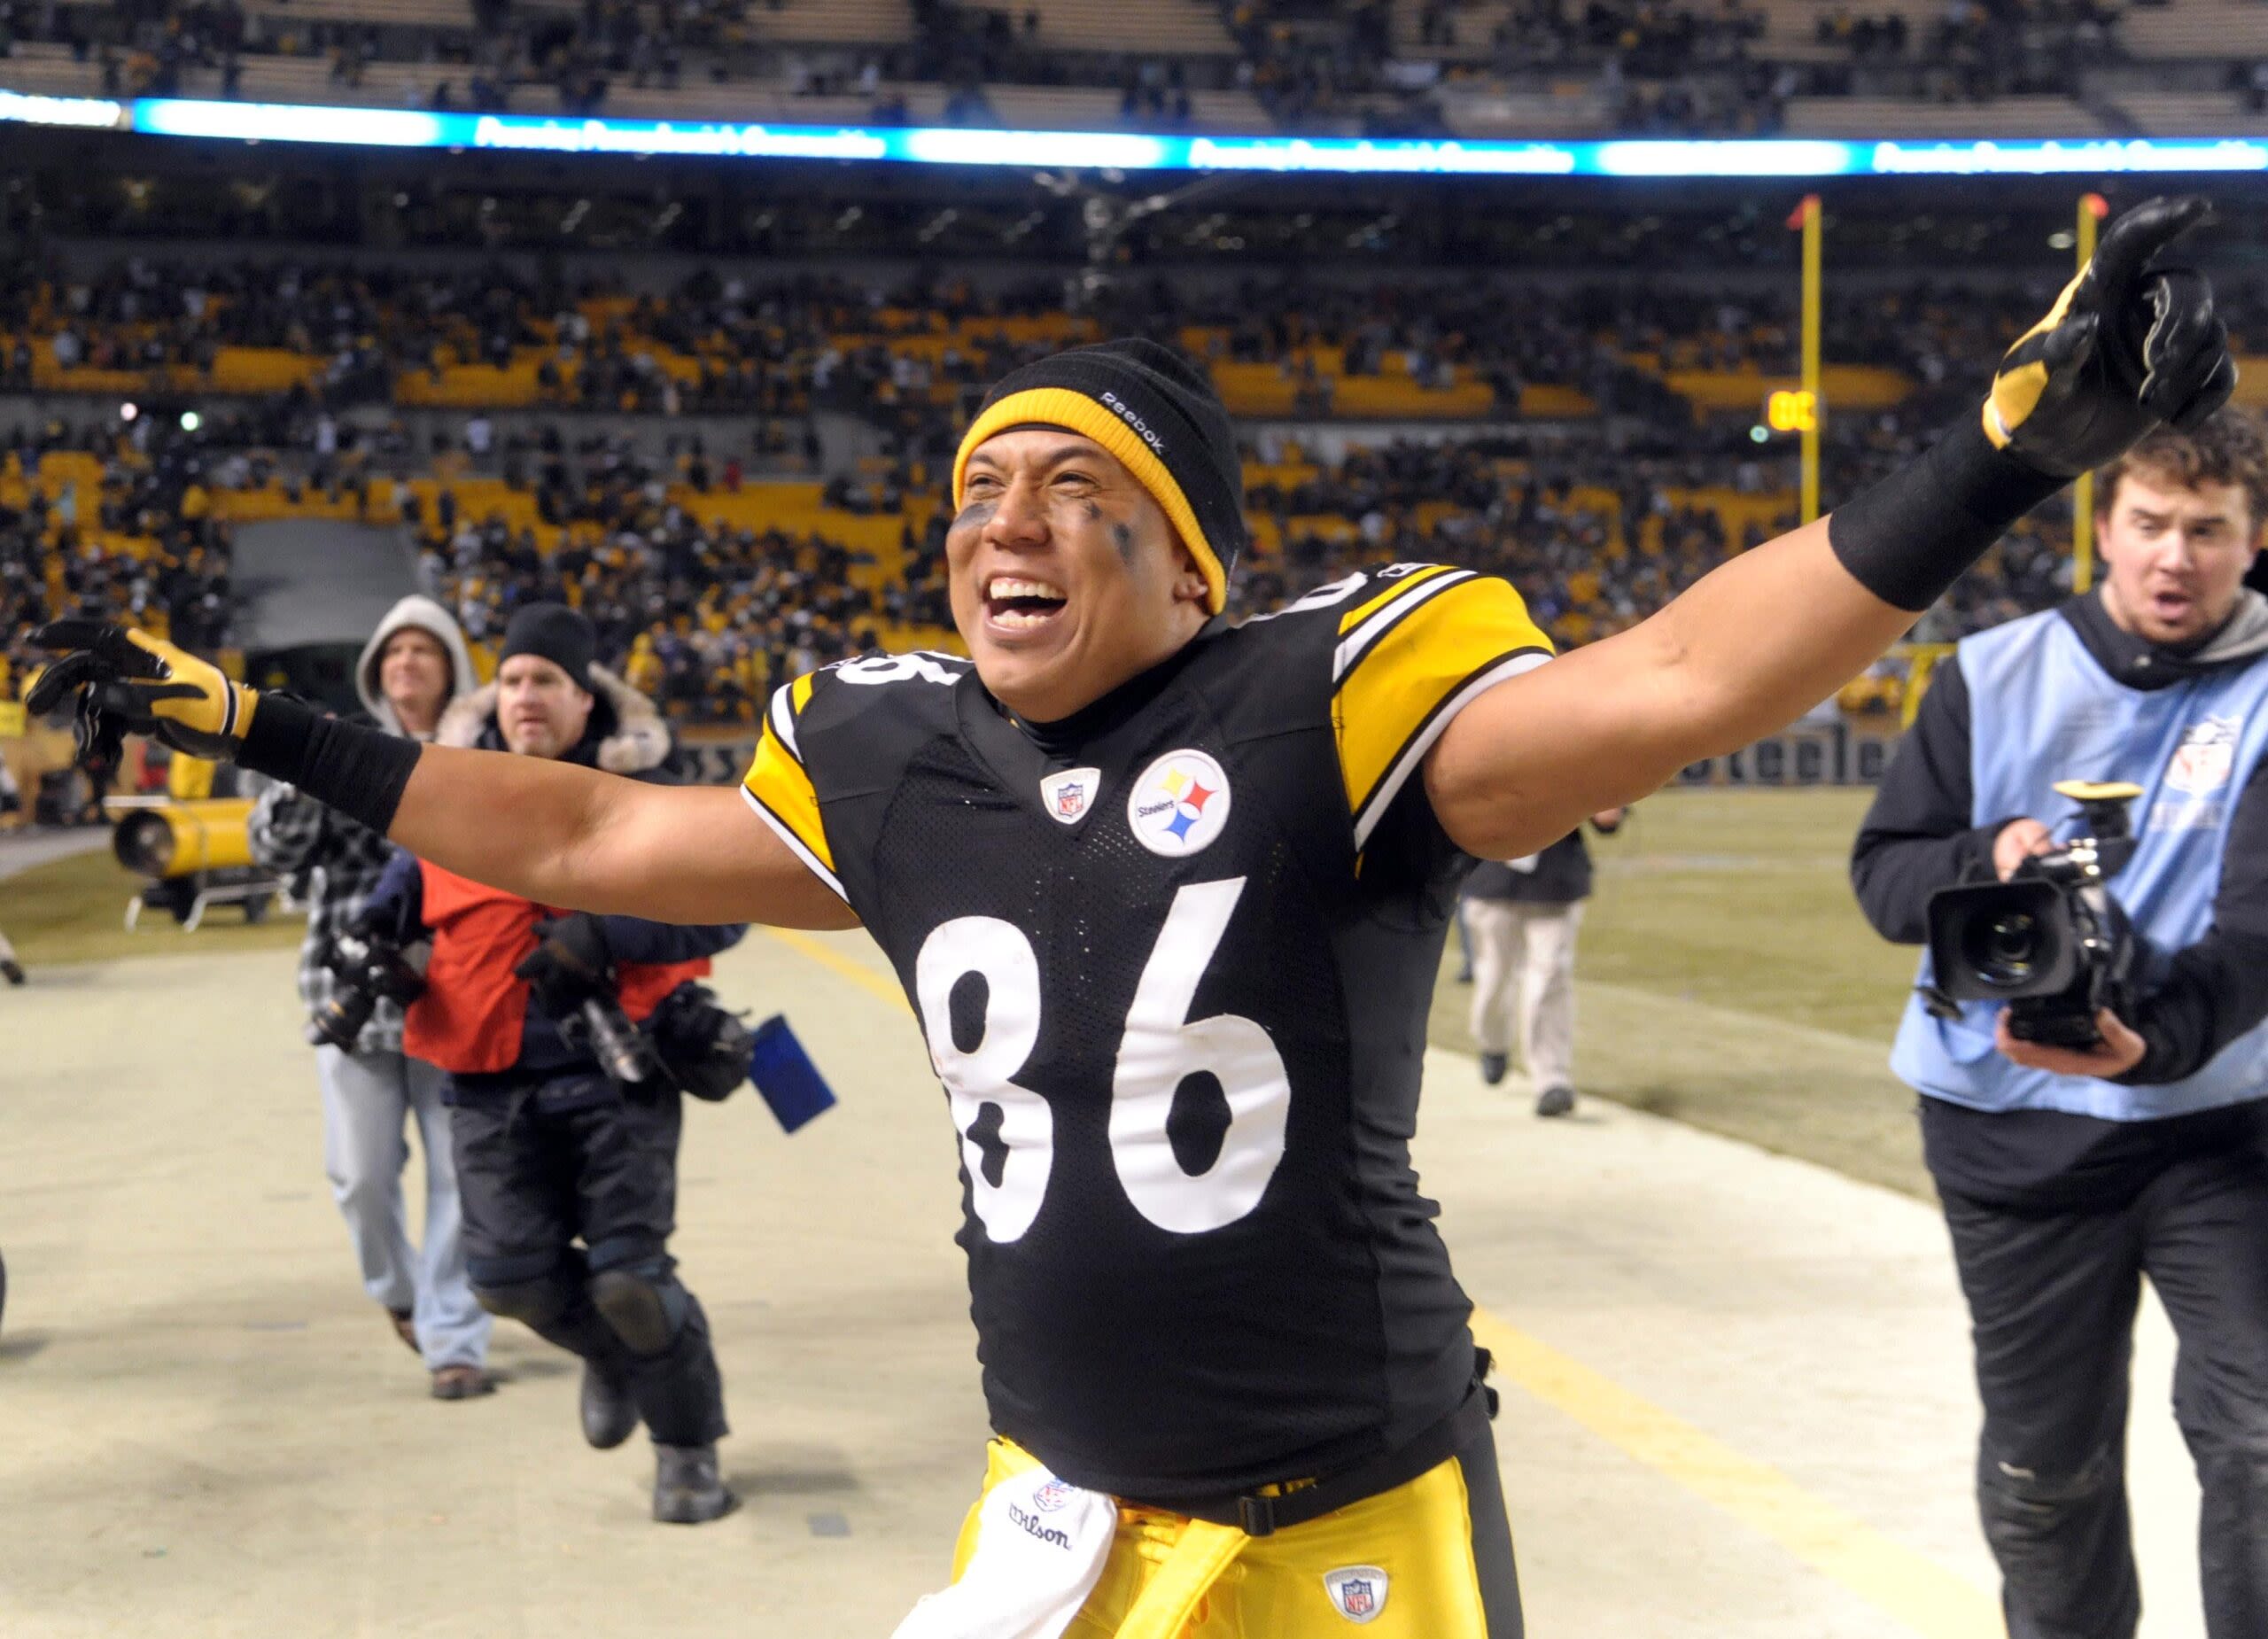 Who is the greatest WR in Steelers history?